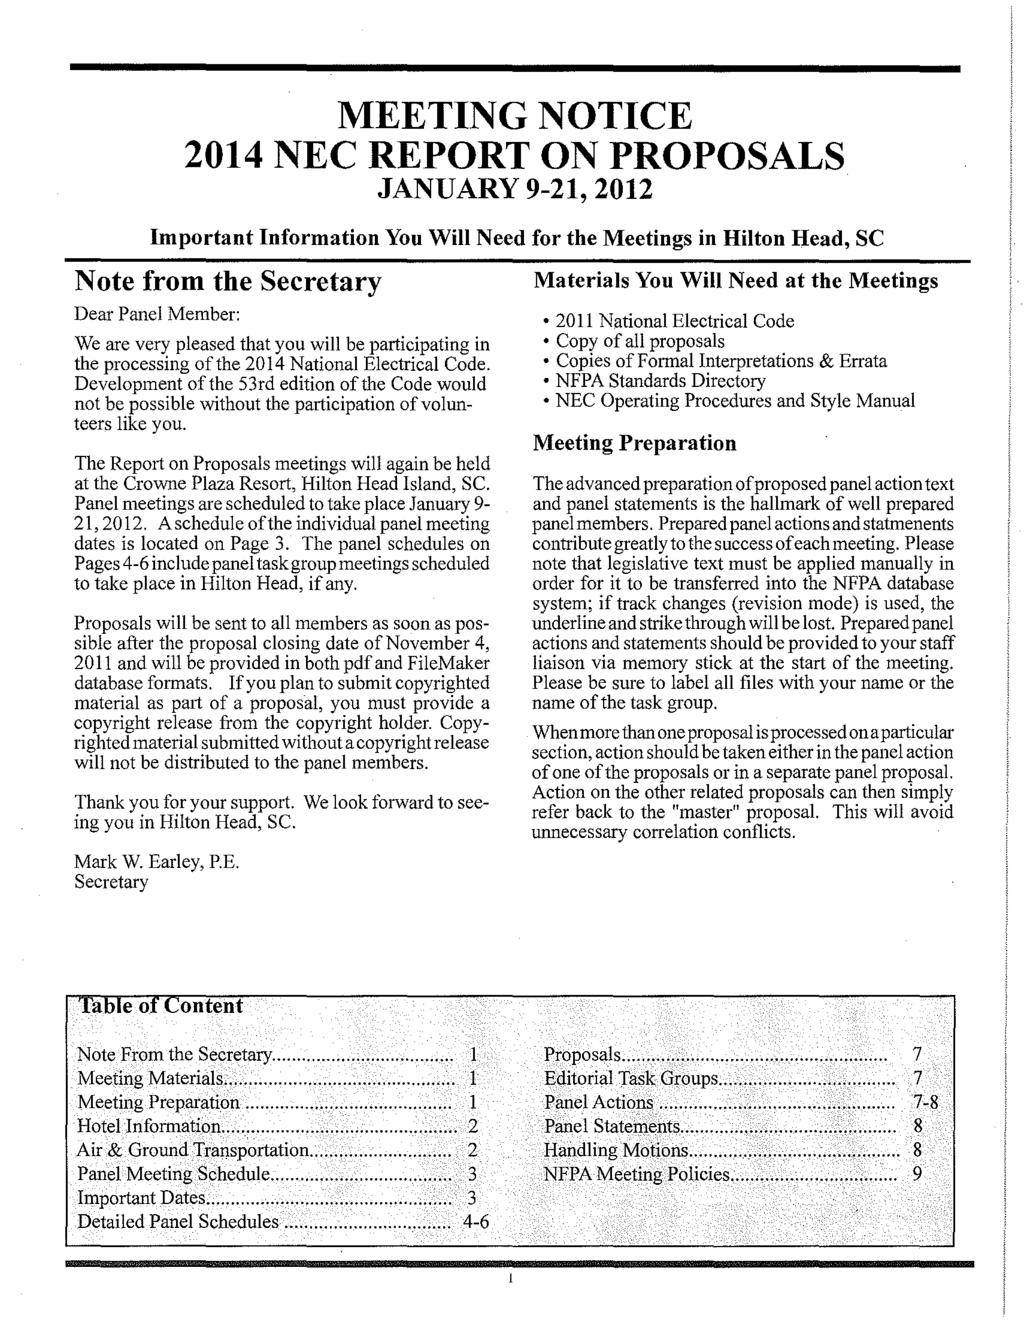 MEETING NOTICE 2014 NEC REPORT ON PROPOSALS JANUARY 9-21,2012 Important Information You Will Need for the Meetings in Hilton Head, SC Note from the Secretary Dear Panel Member: We are very pleased